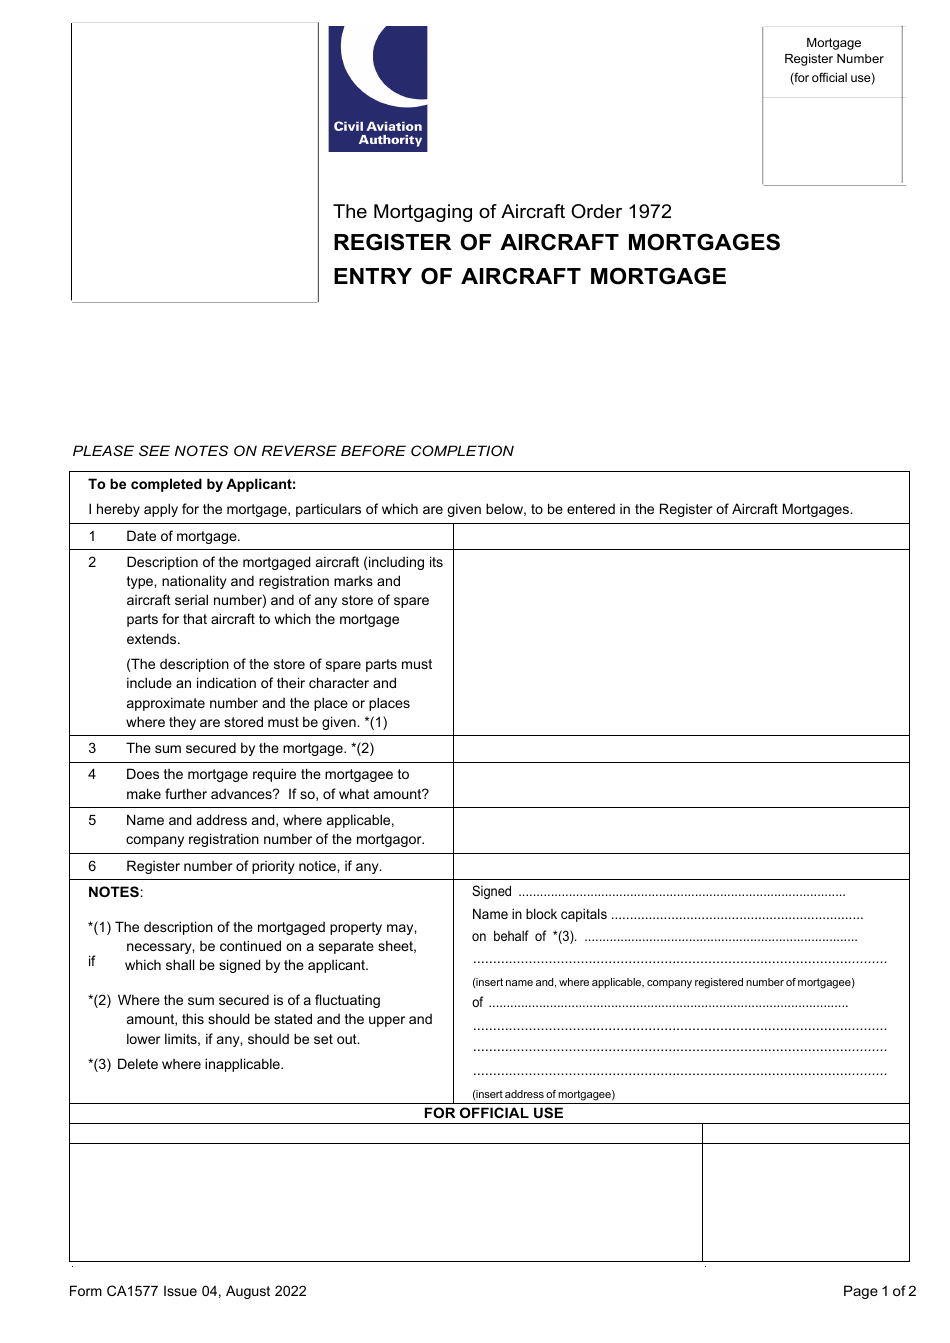 Form CA1577 Register of Aircraft Mortgages Entry of Aircraft Mortgage - United Kingdom, Page 1